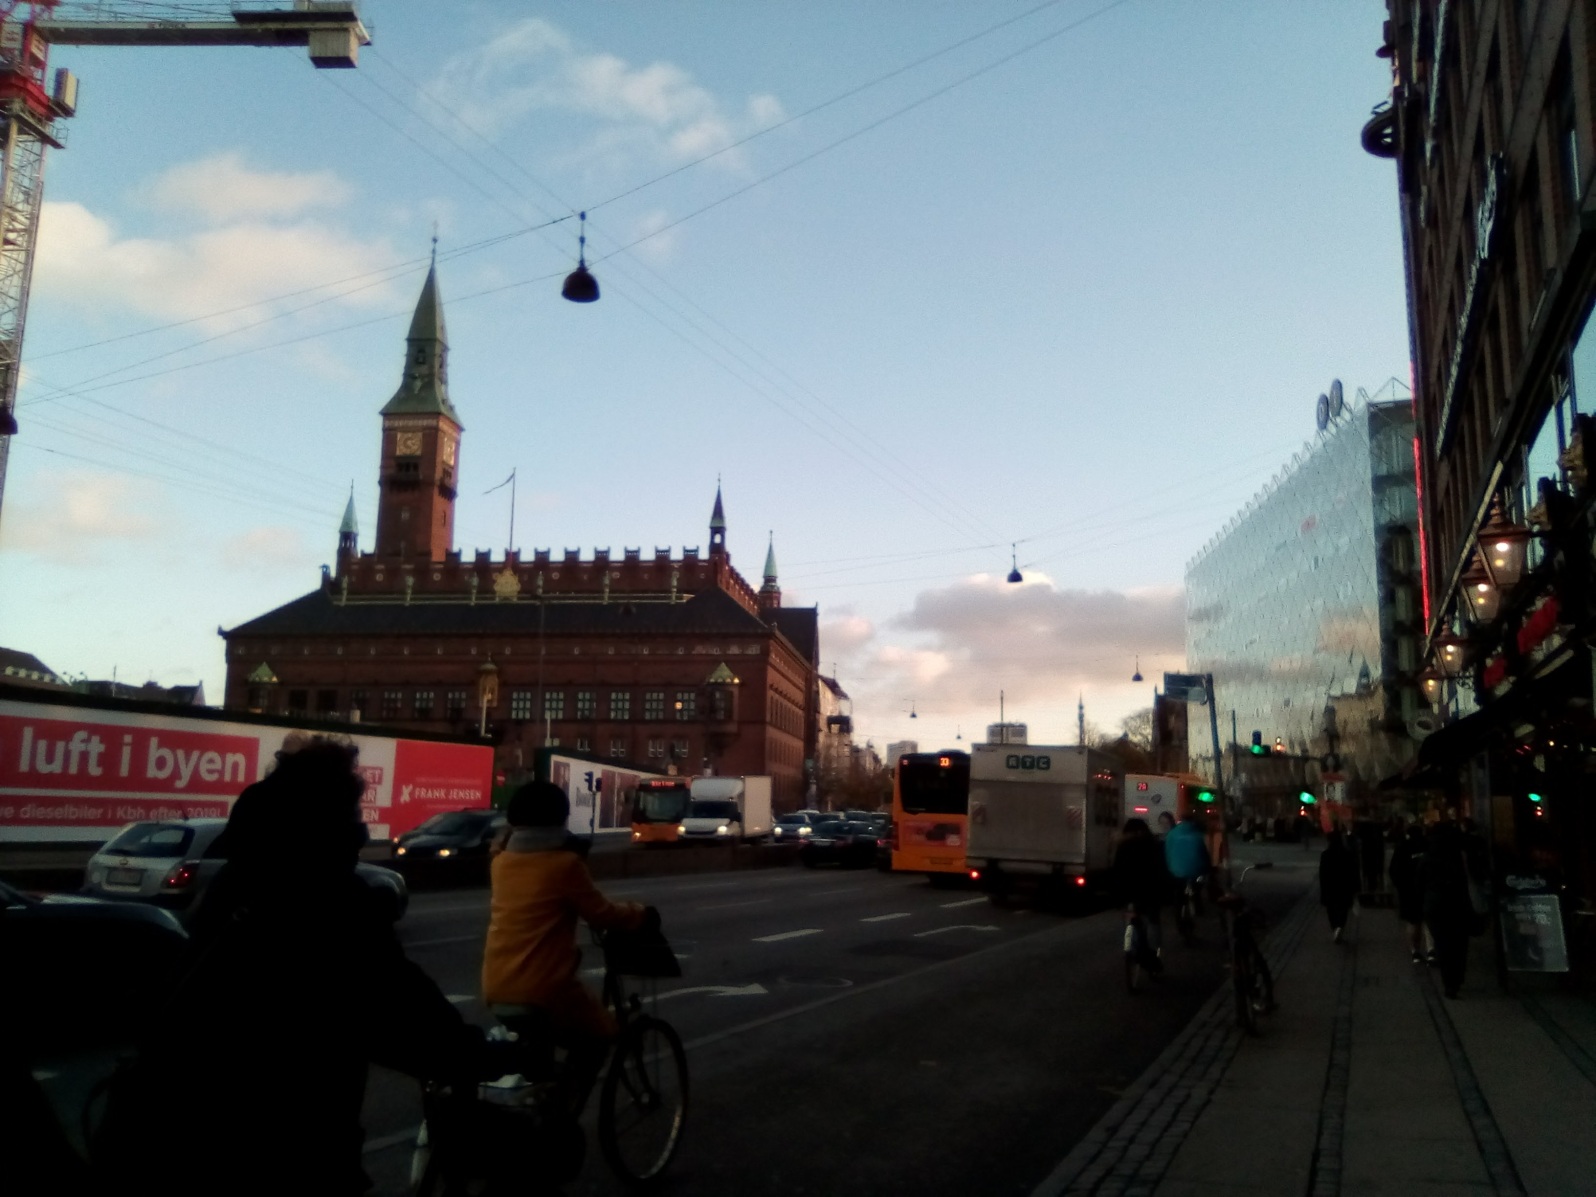 Downtown Copenhagen (if you look closely, there there are more Danish words I still need to learn here)